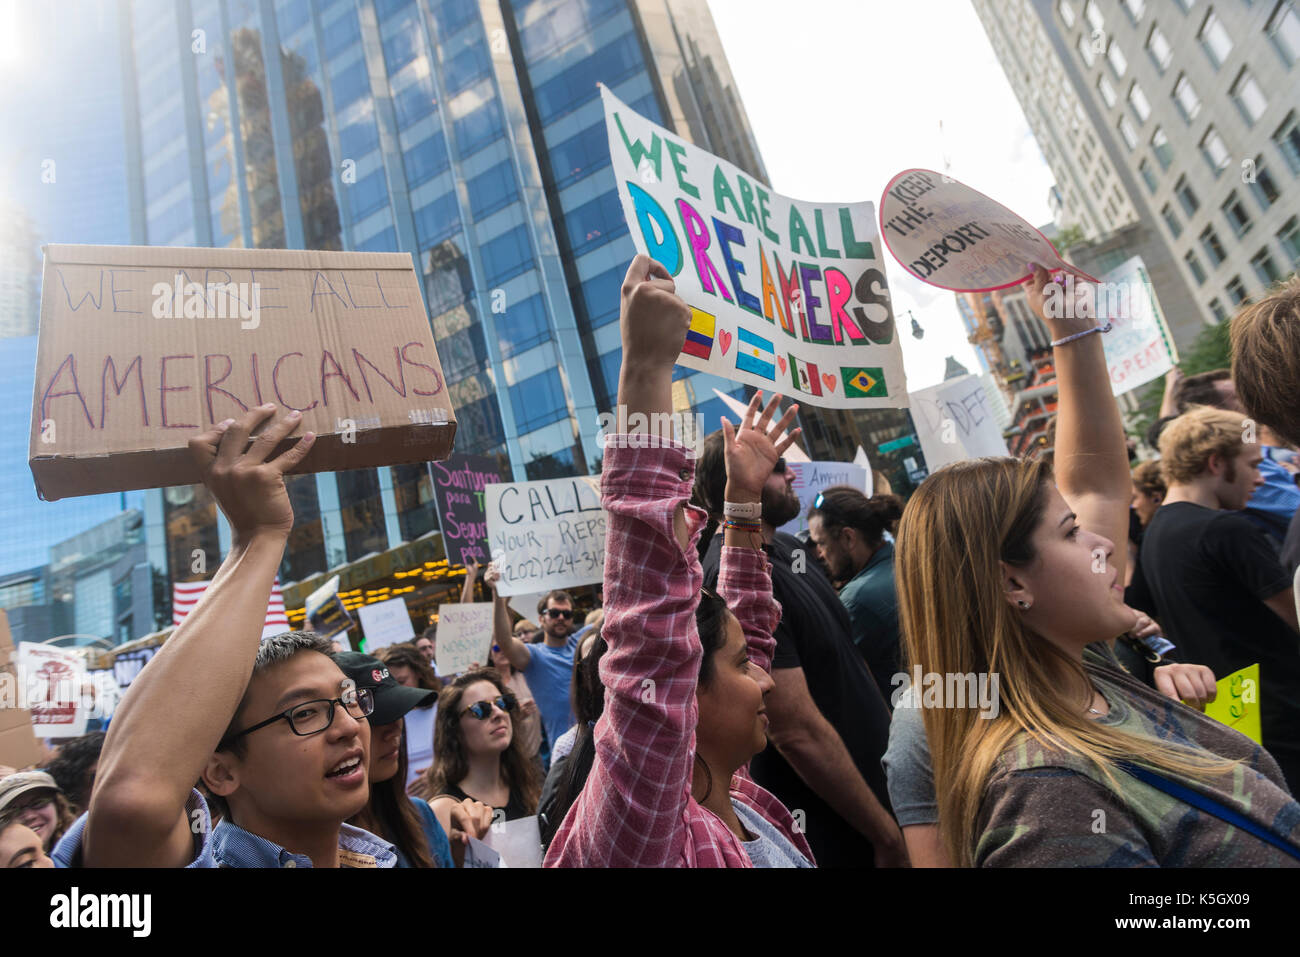 New York, NY 9 September 2017 - Several thousand 'Dreamers, ' the children of undocumented immigrants, and immigratiob activists gathered outside Trump Hotel and Towers on Columbus Circle, to speak out against an end to DACA (Deferred Action for Childhood Arrivals) after trump's attempts to dismantleit. CREDIT: ©Stacy Walsh Rosenstock/Alamy Stock Photo